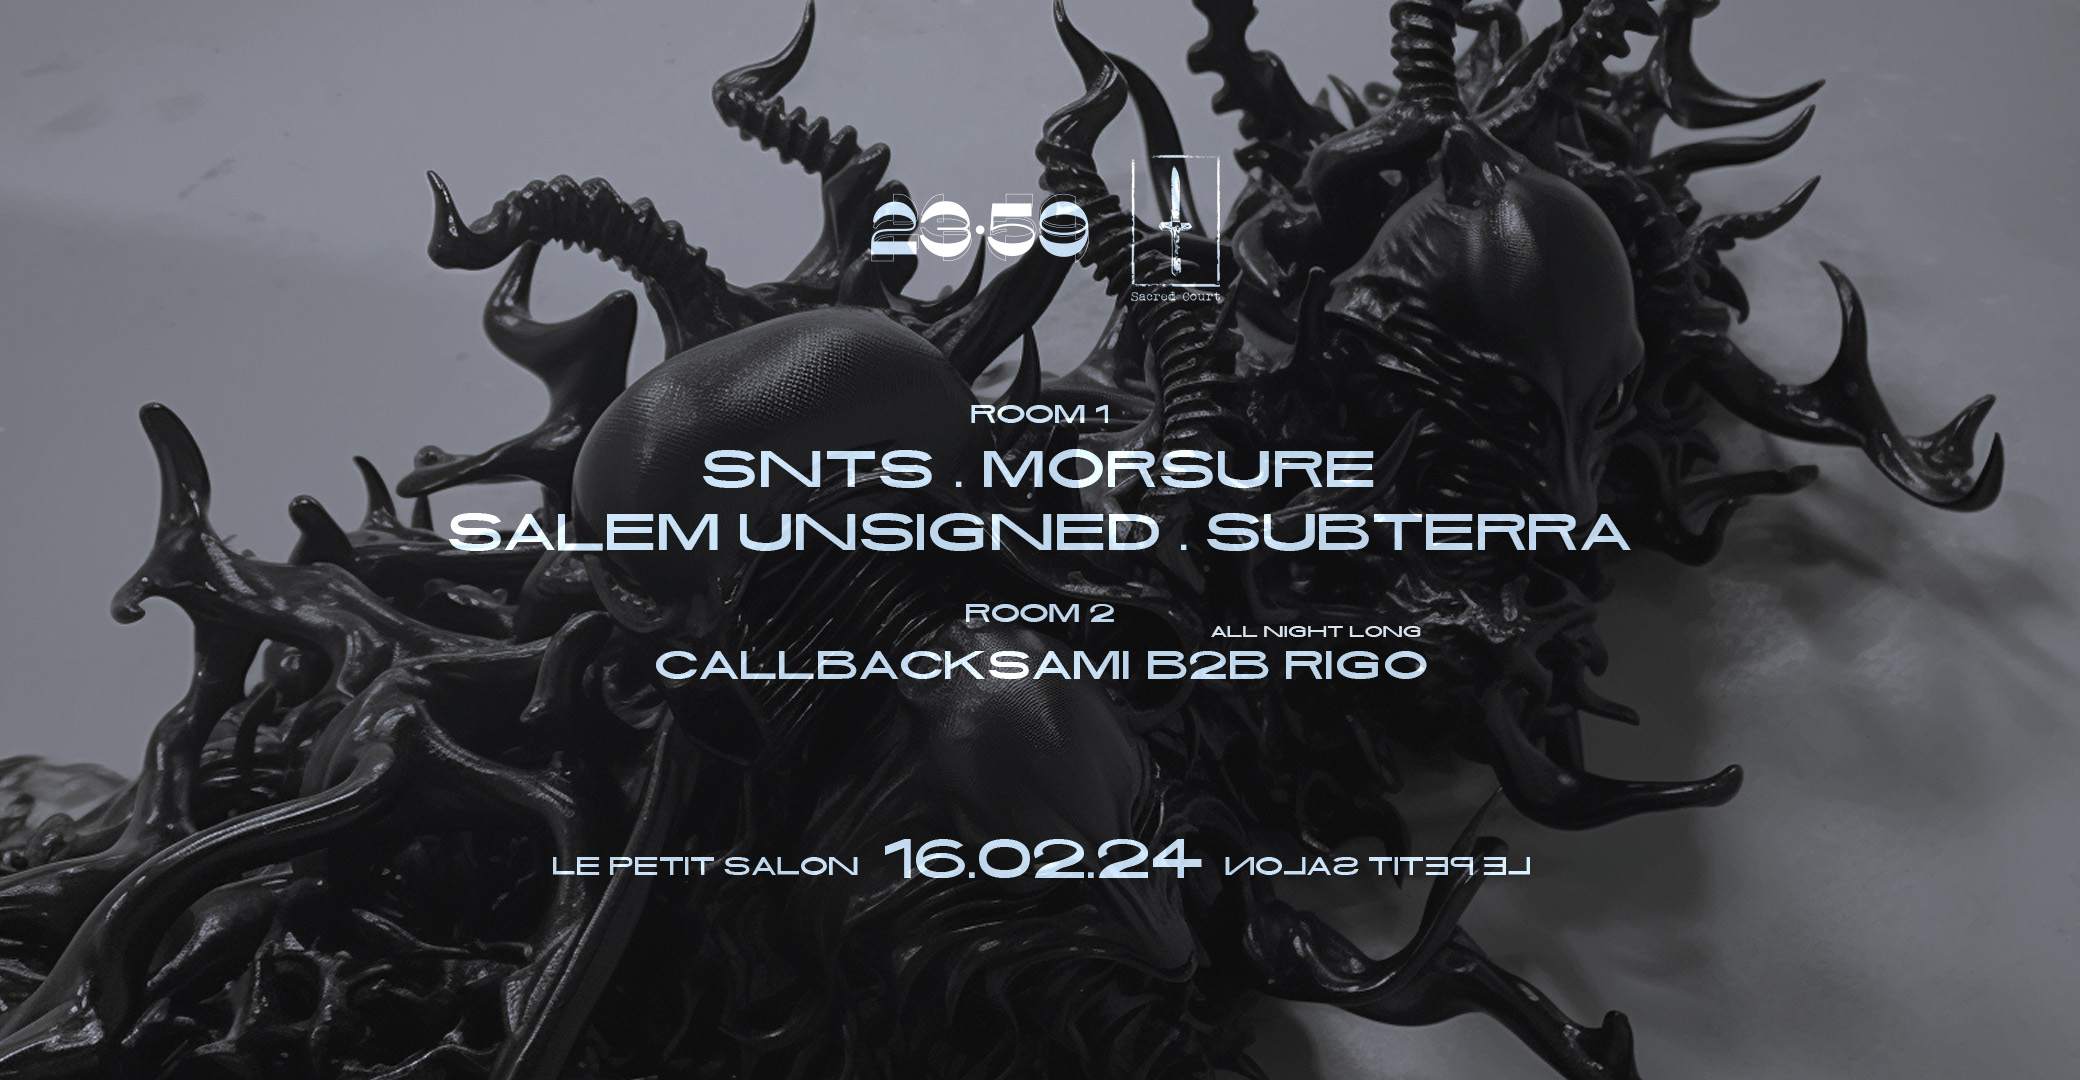 23:59 x Sacred Court - SNTS, MORSURE, Subterra and More - フライヤー表